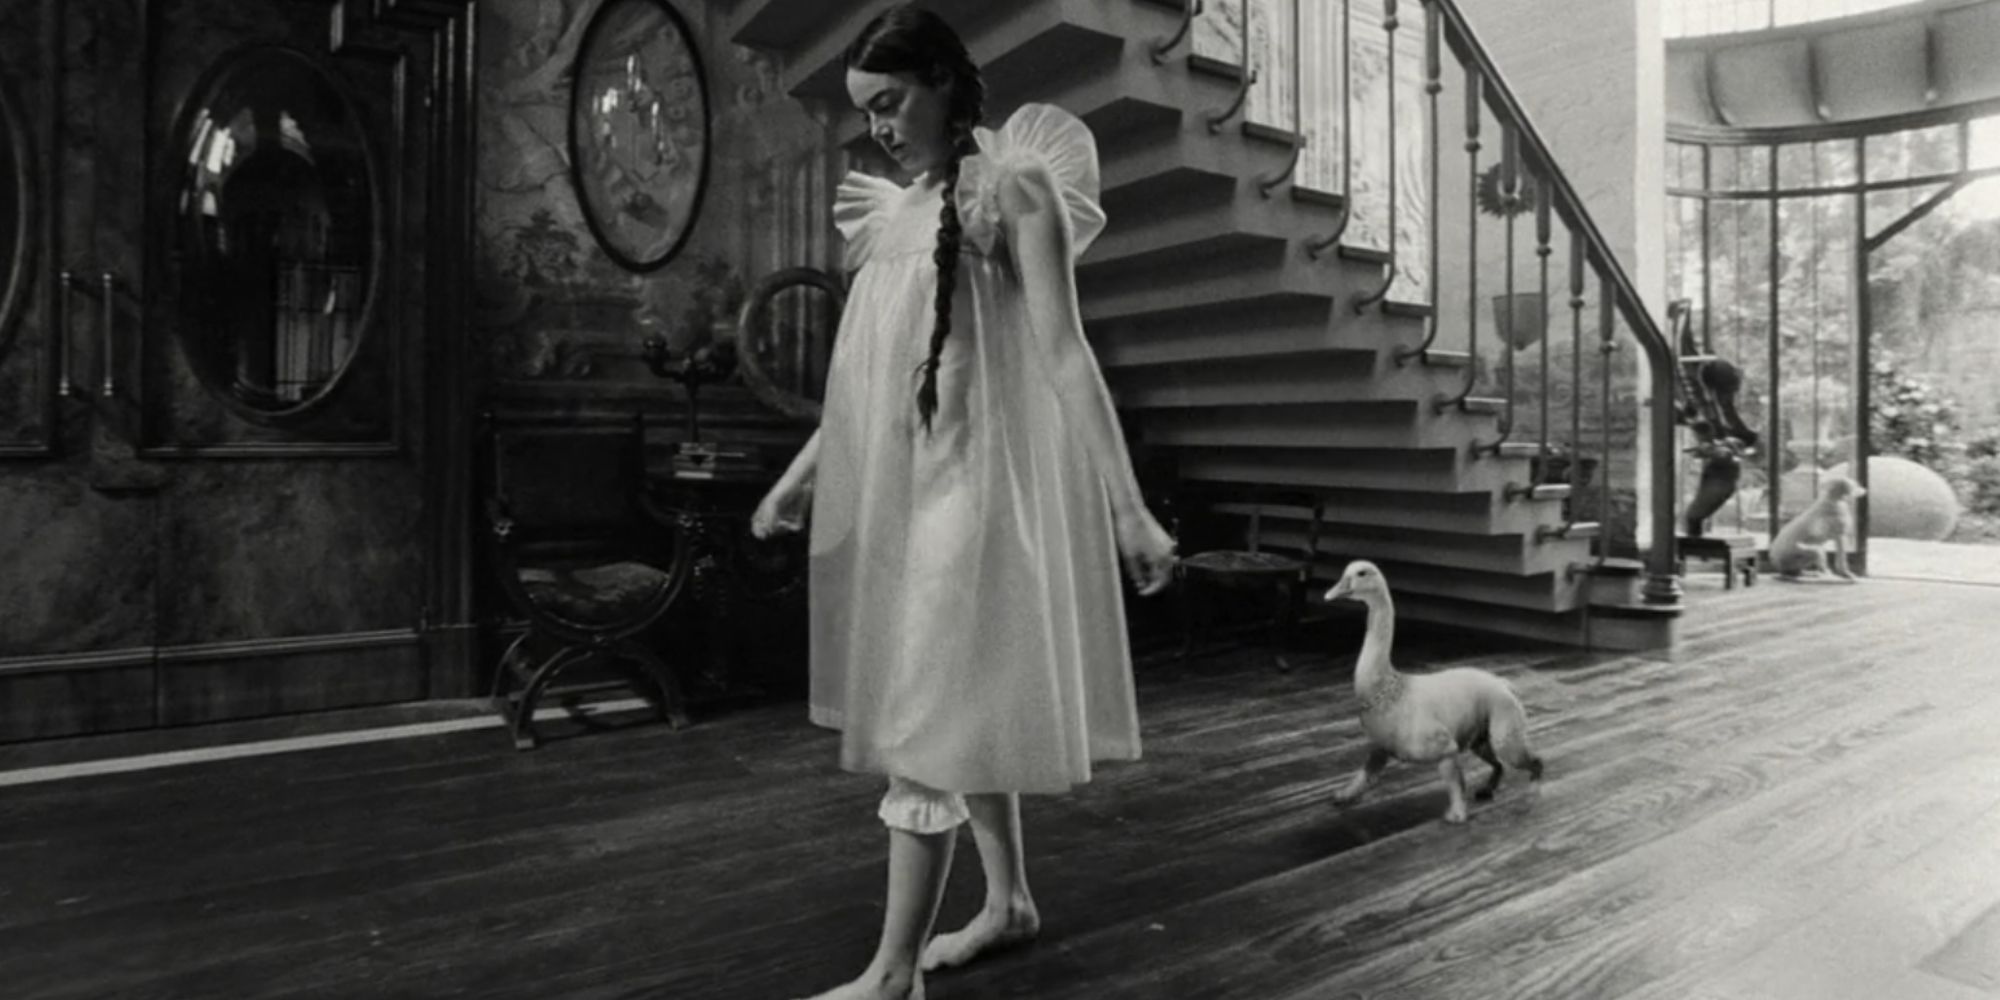 Emma Stone as Bella Baxter in Poor Things walking along in a white dress with a duck/dog hybrid walking behind her